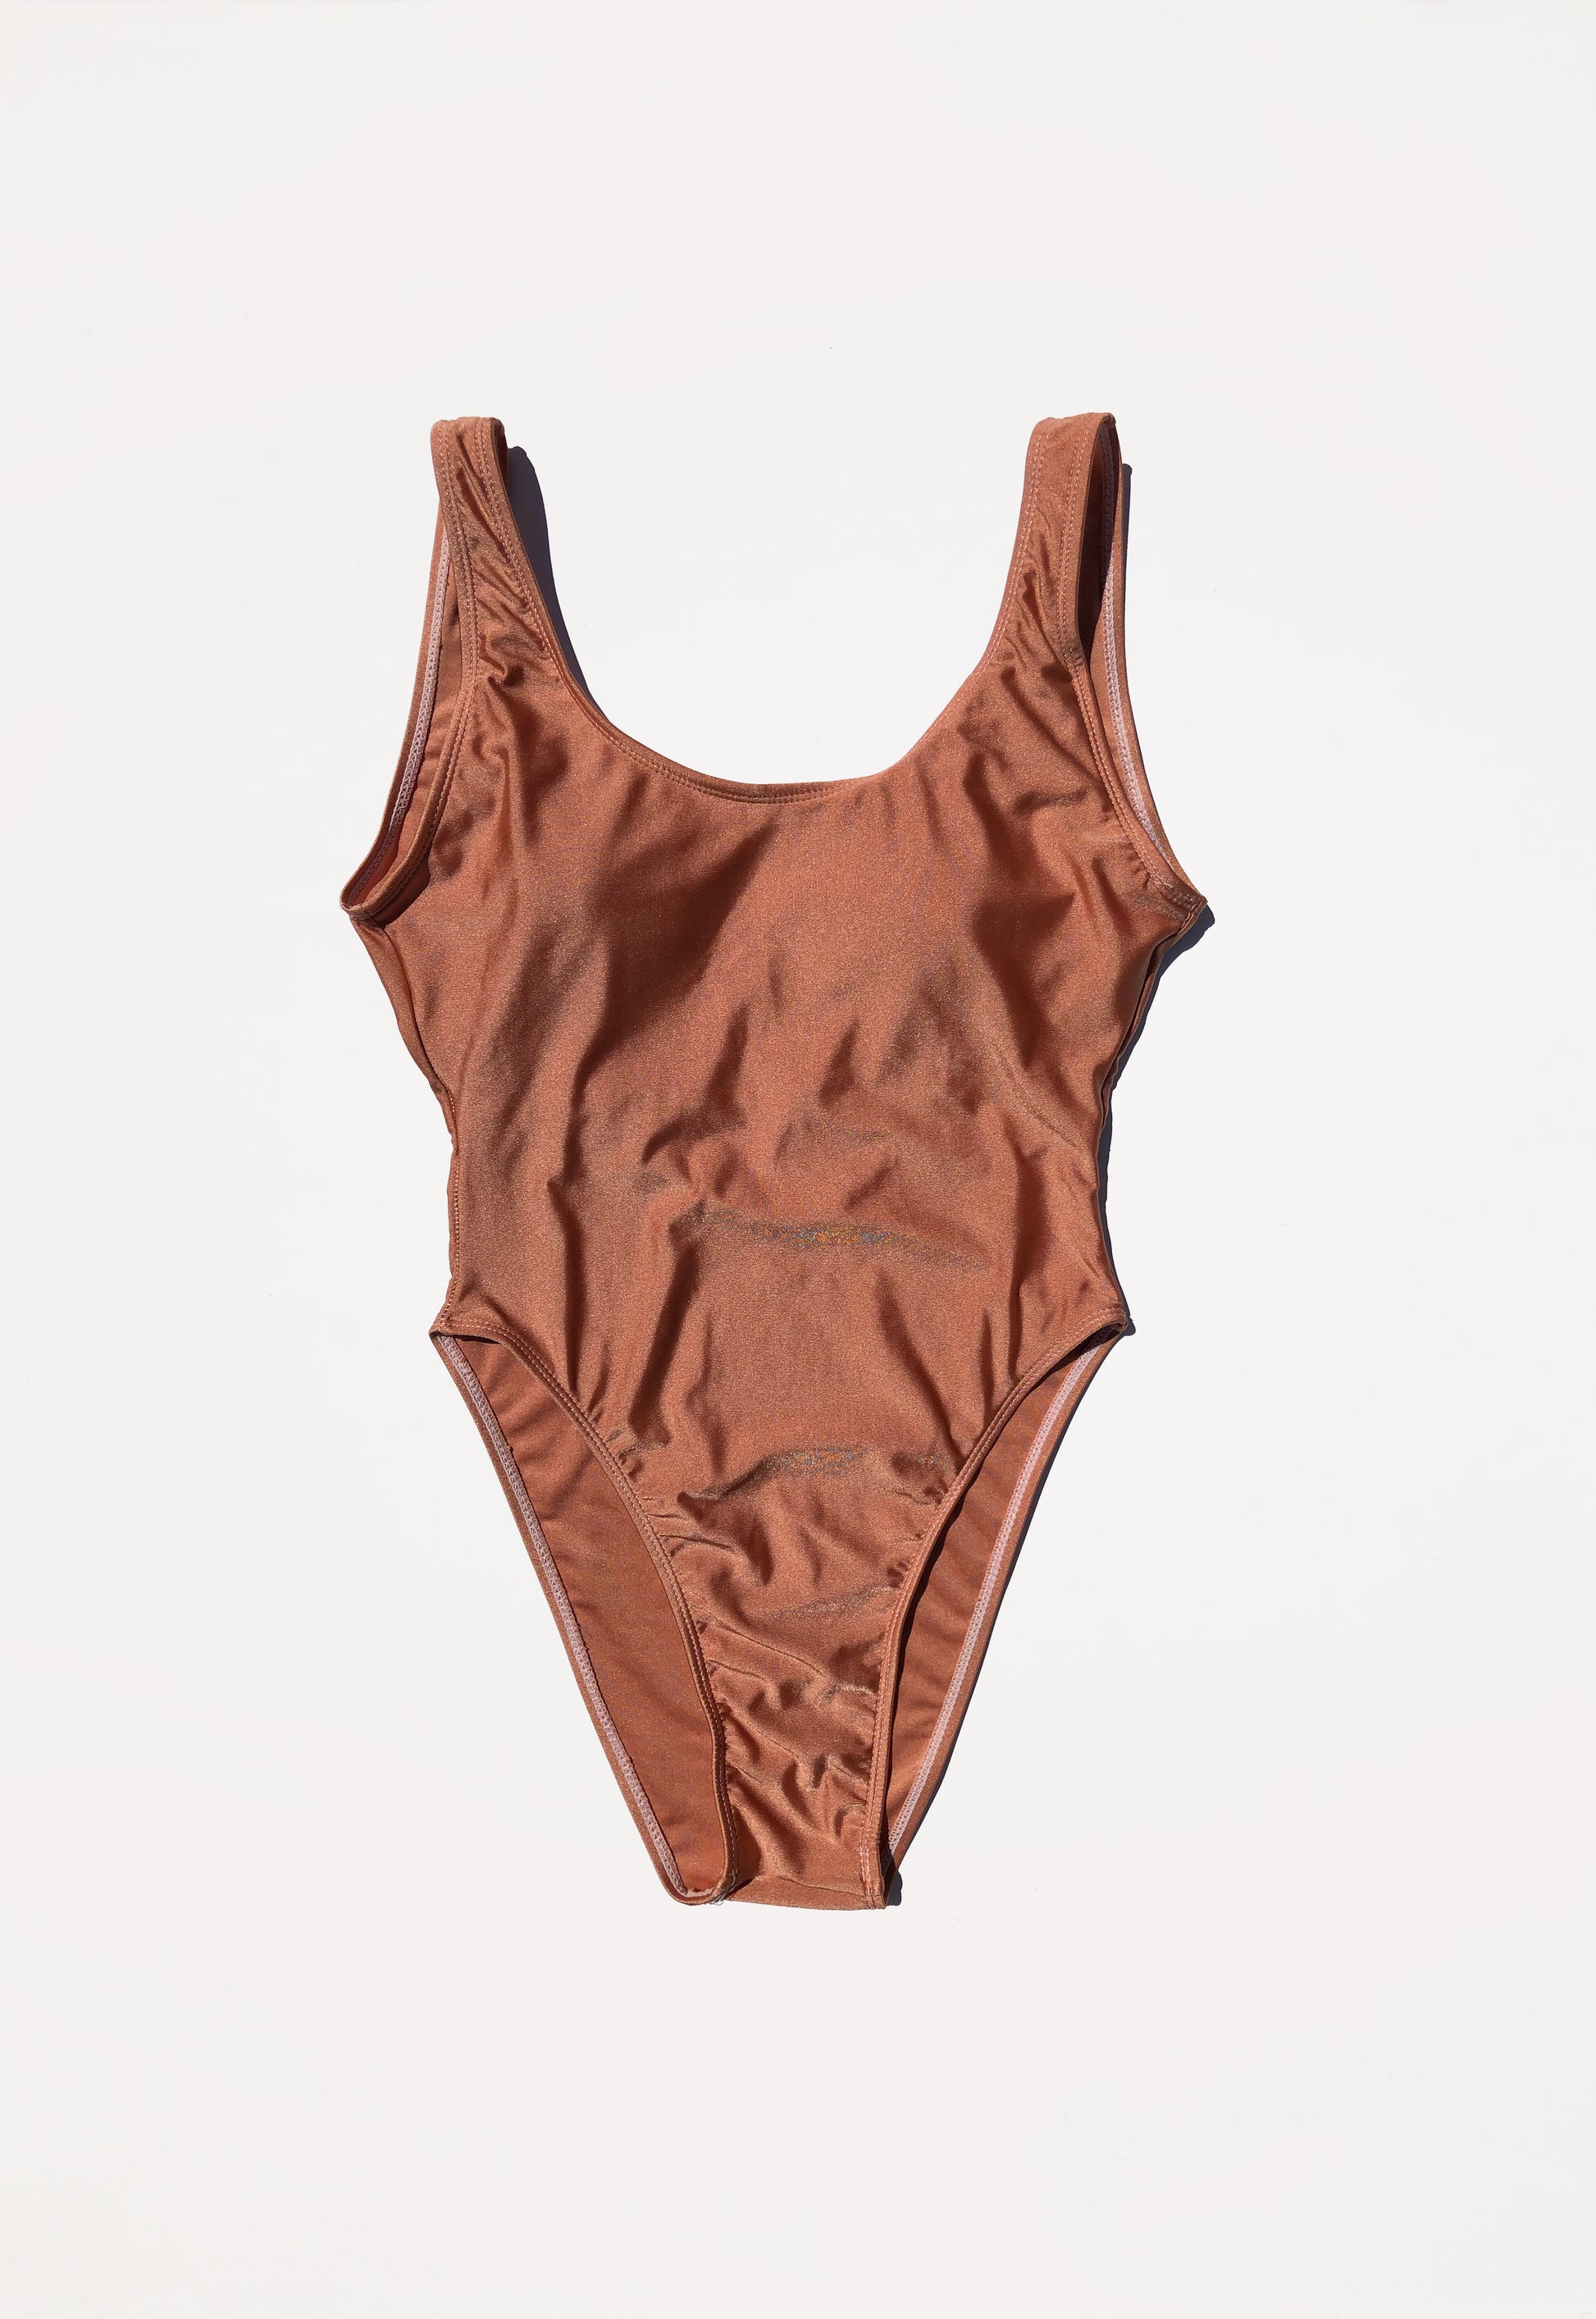 French-cut peach maillot size small – Minnow Bathers